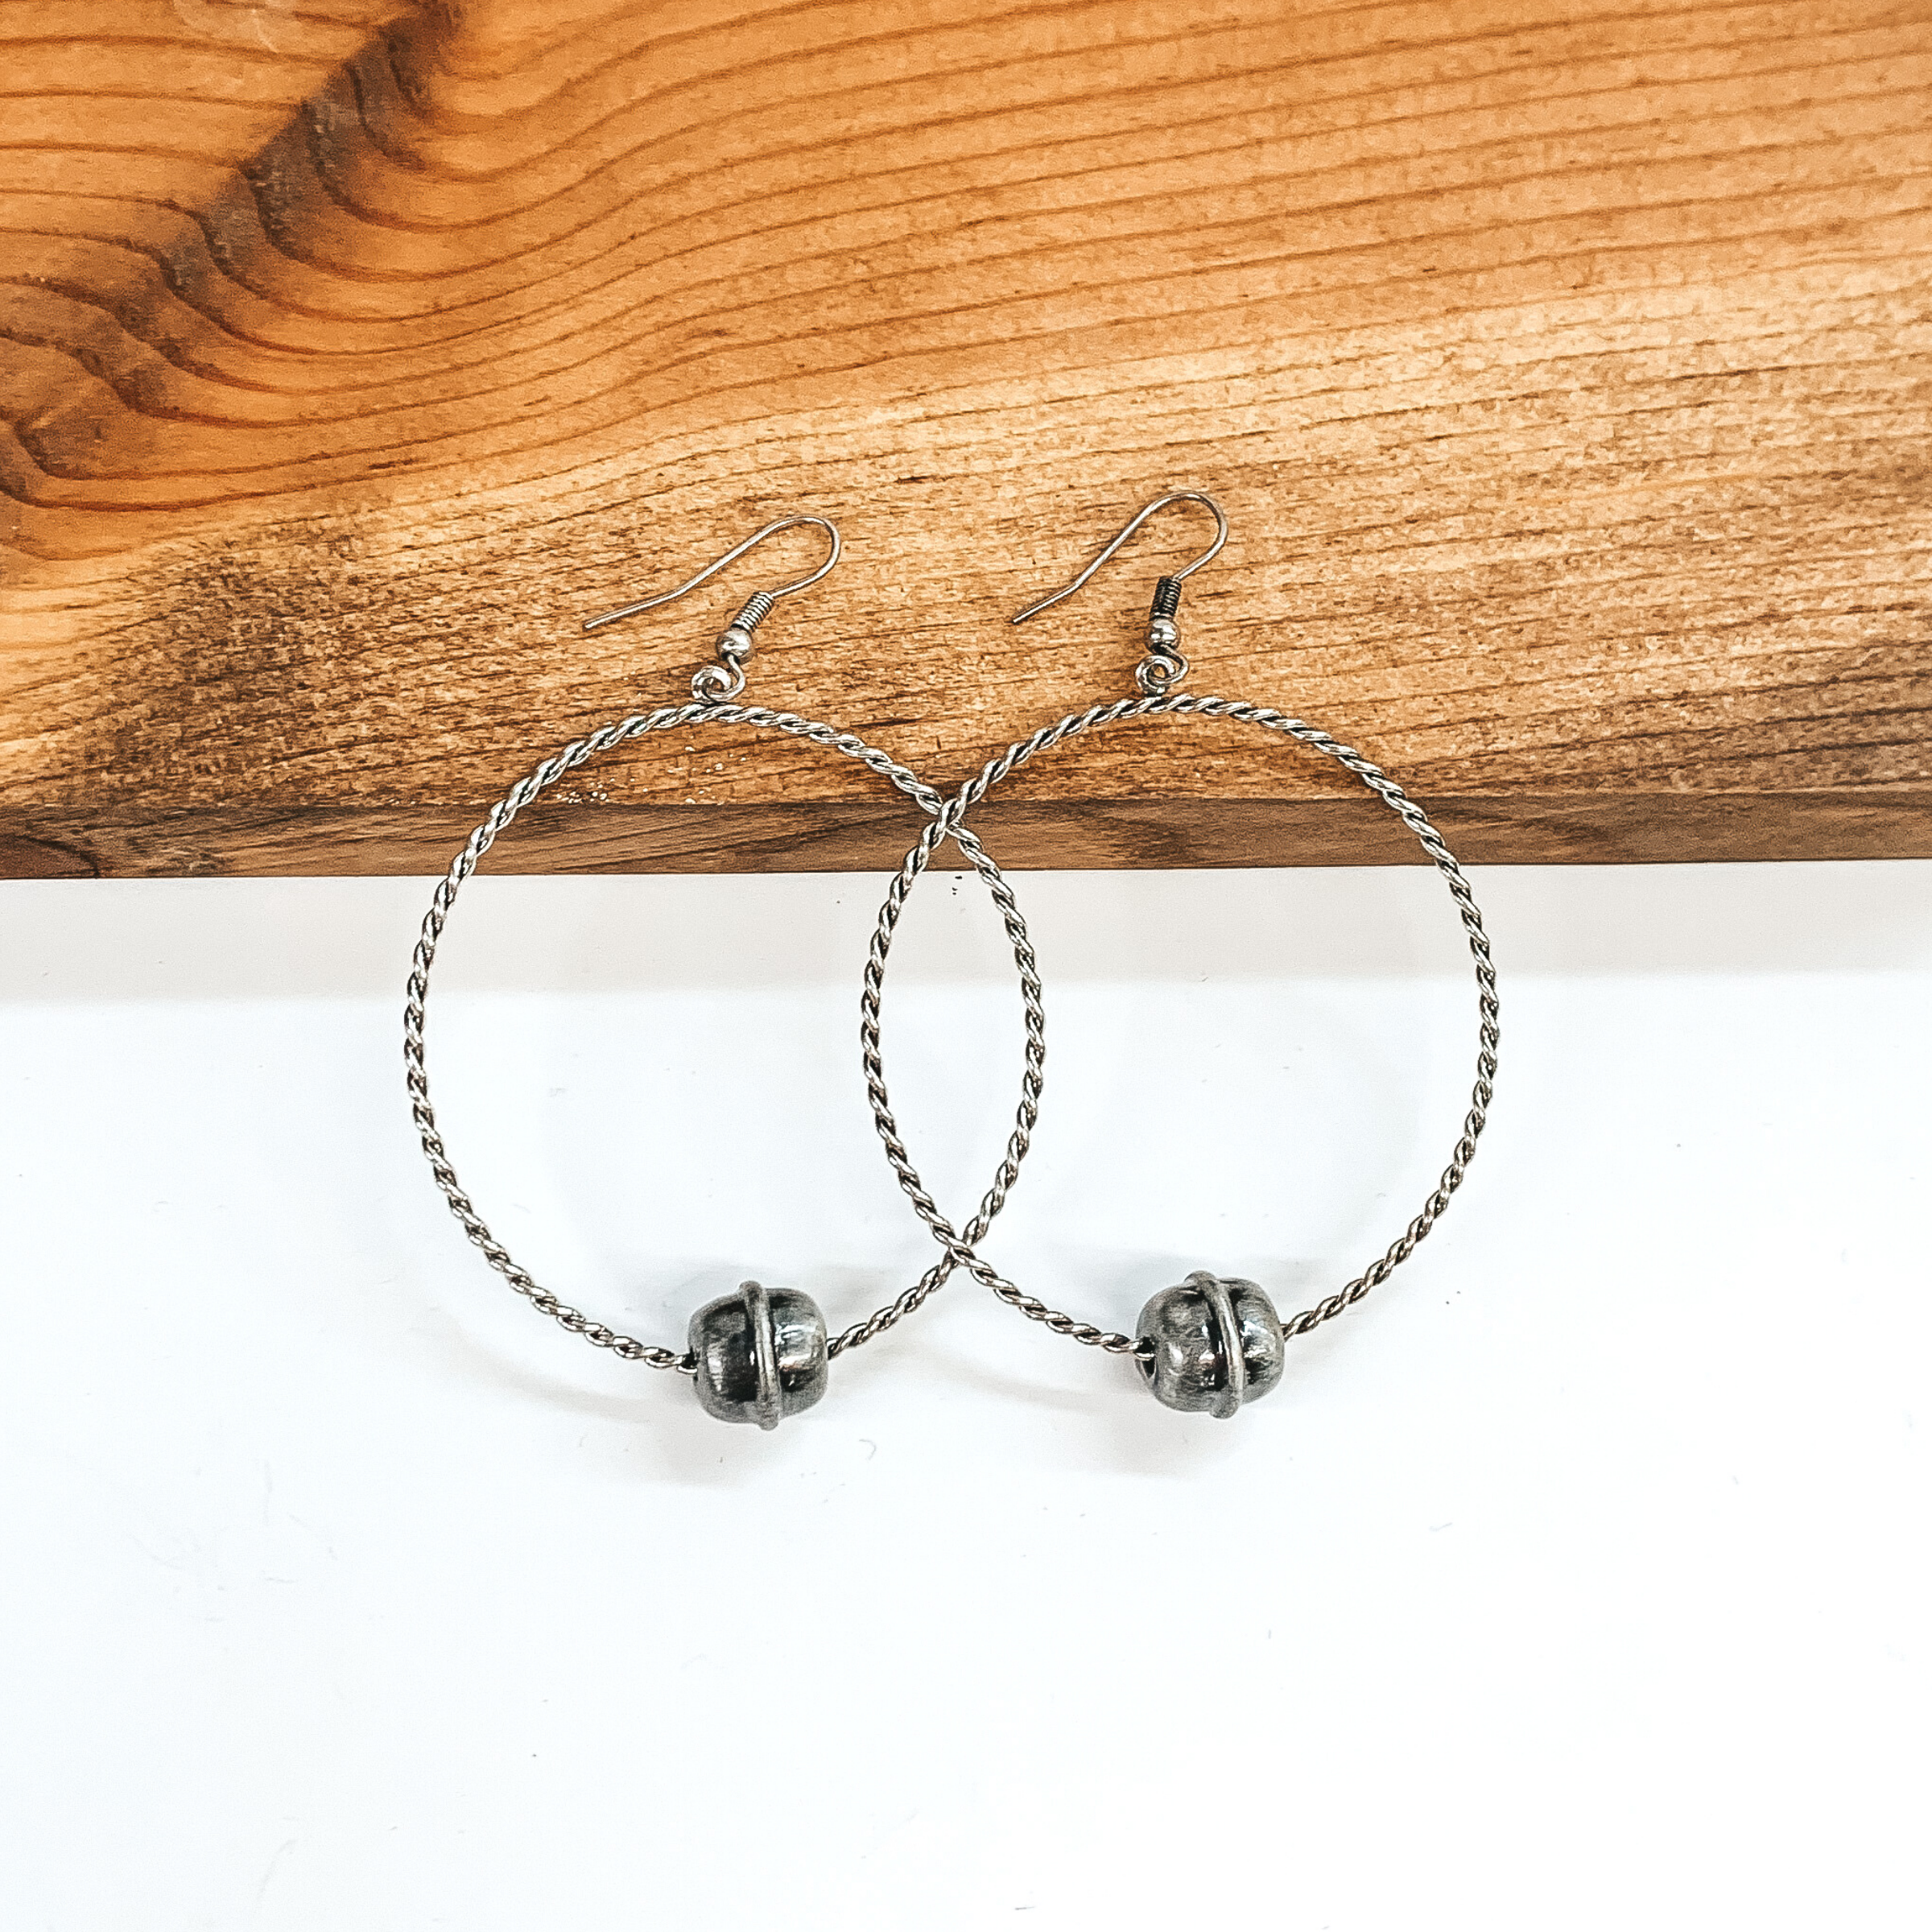 Silver twisted circle drop earrings with a single silver Navajo inspired bead at the bottom. These earrings are pictured laying against a dark piece of wood on a white background.